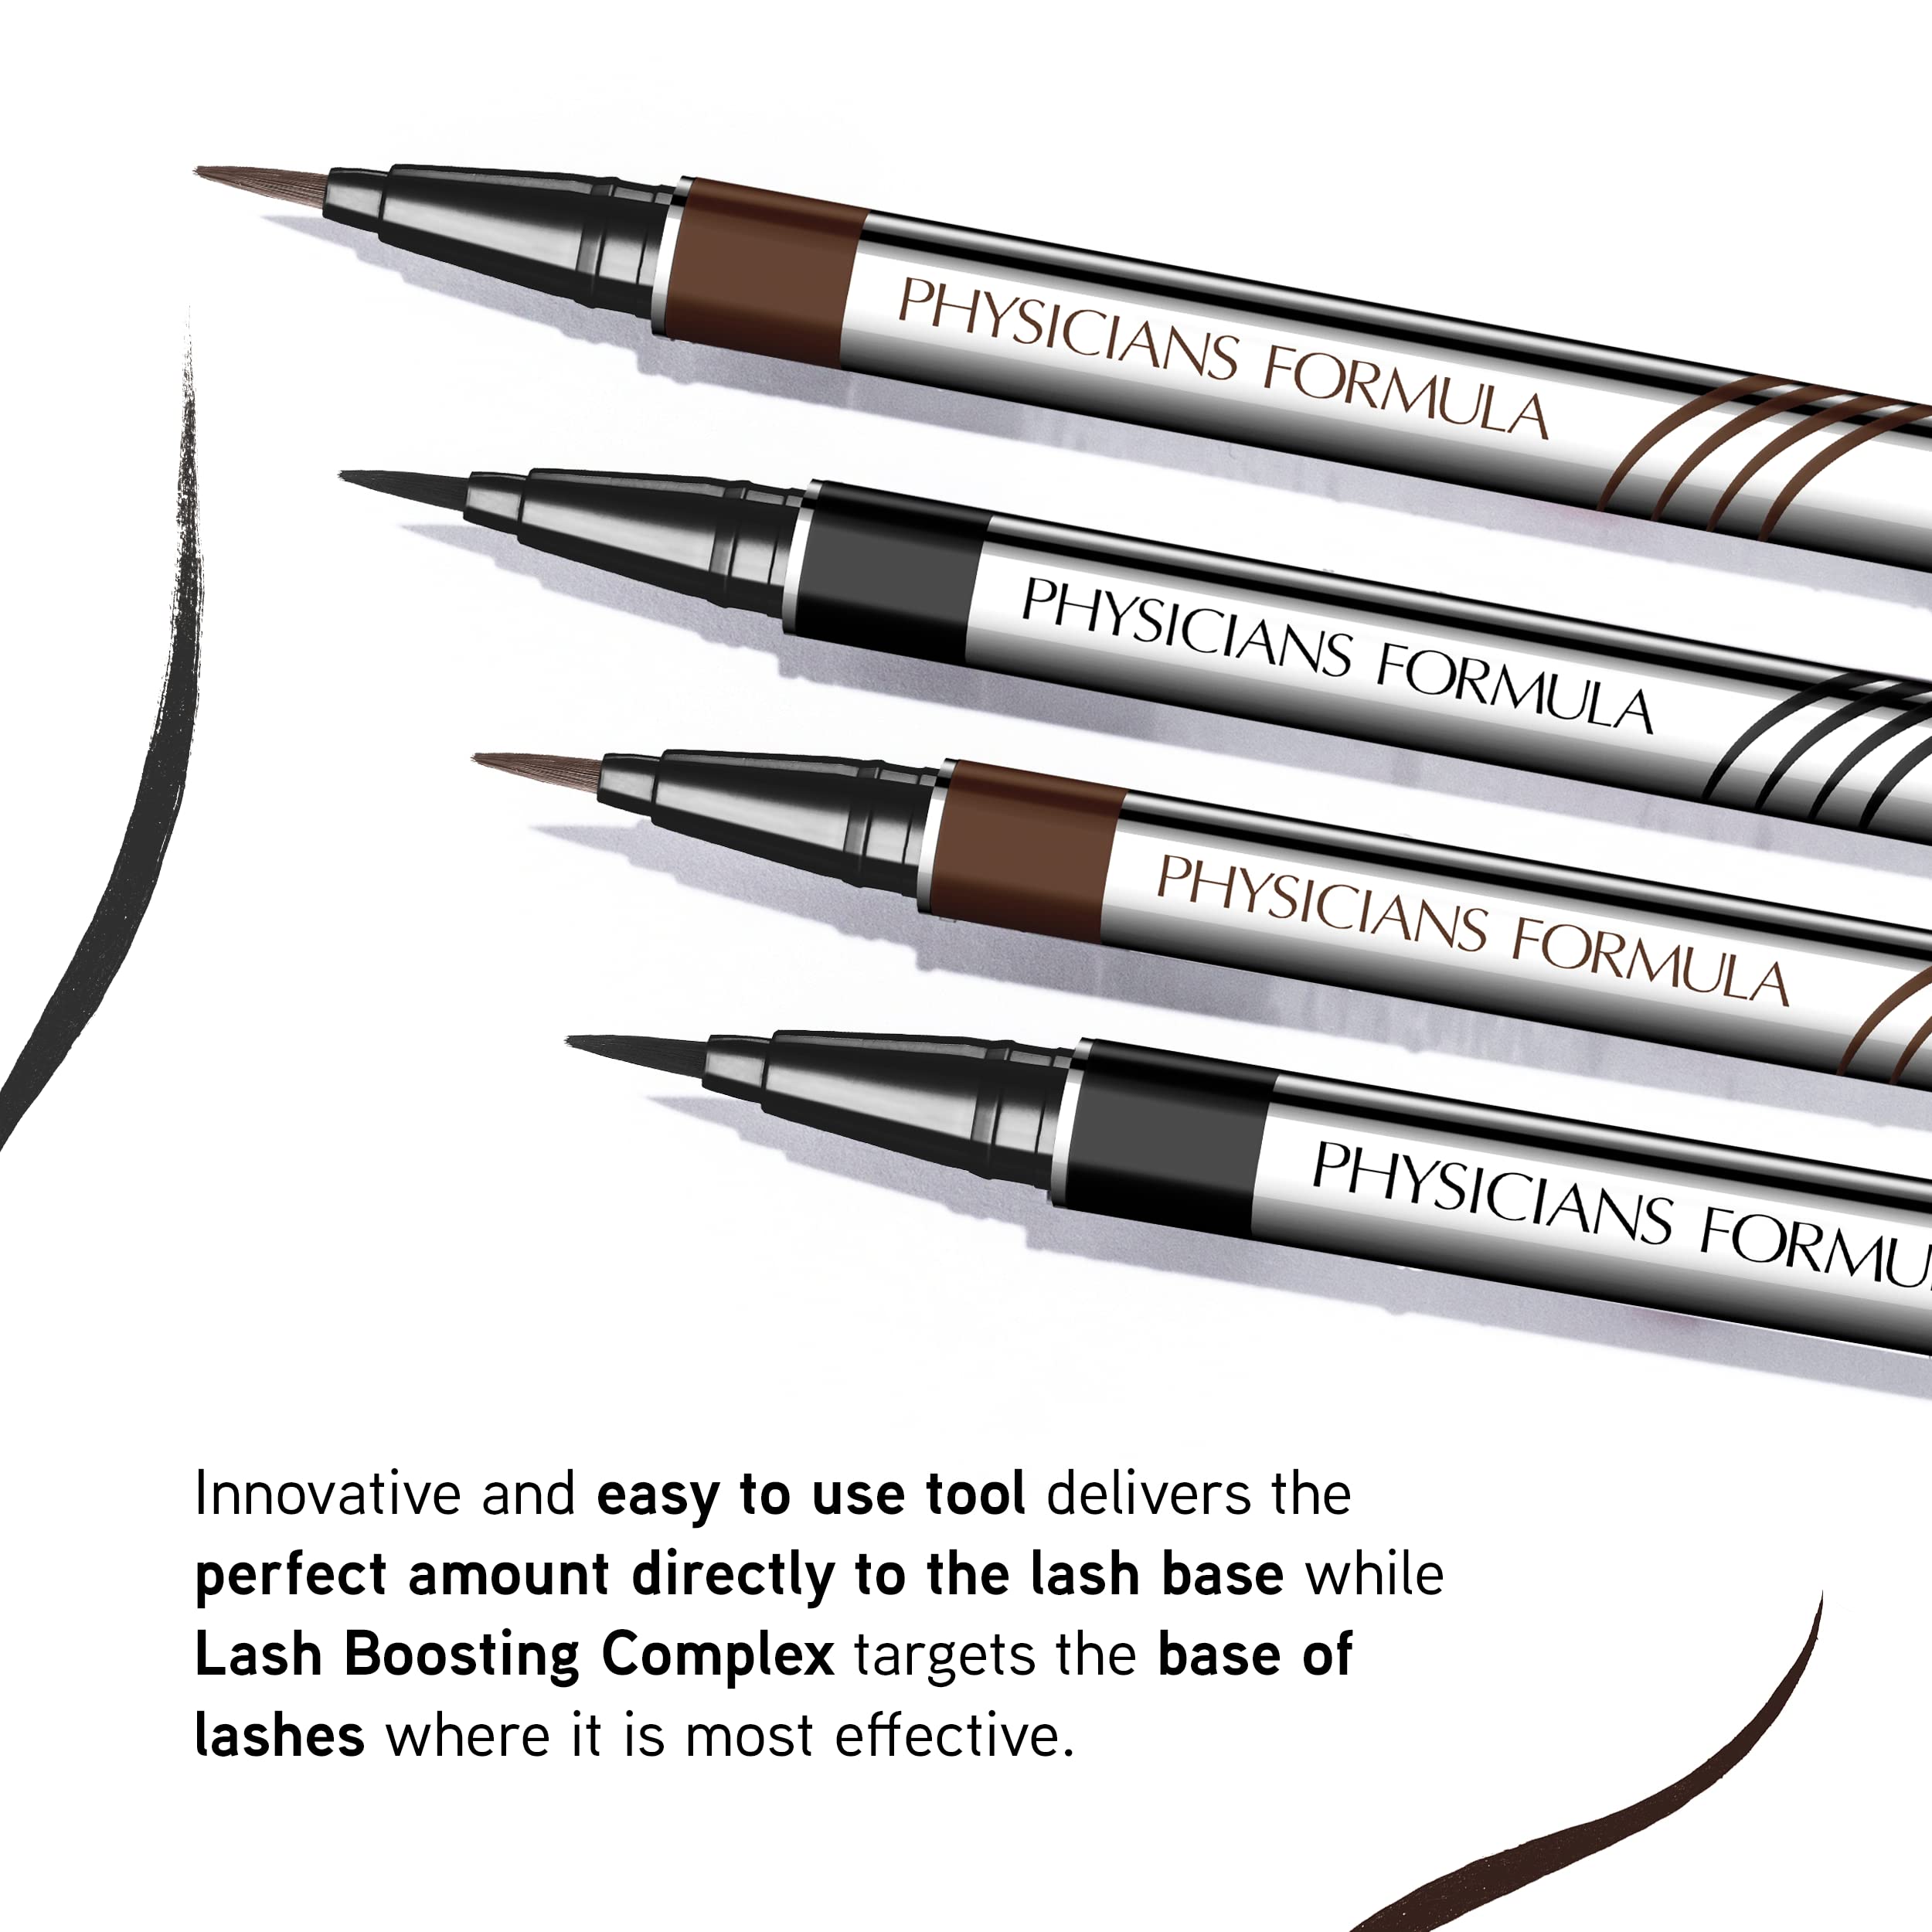 Physicians Formula Ultra-Fine Liquid Eyeliner Dark Brown | Dermatologist Tested, Clinicially Tested